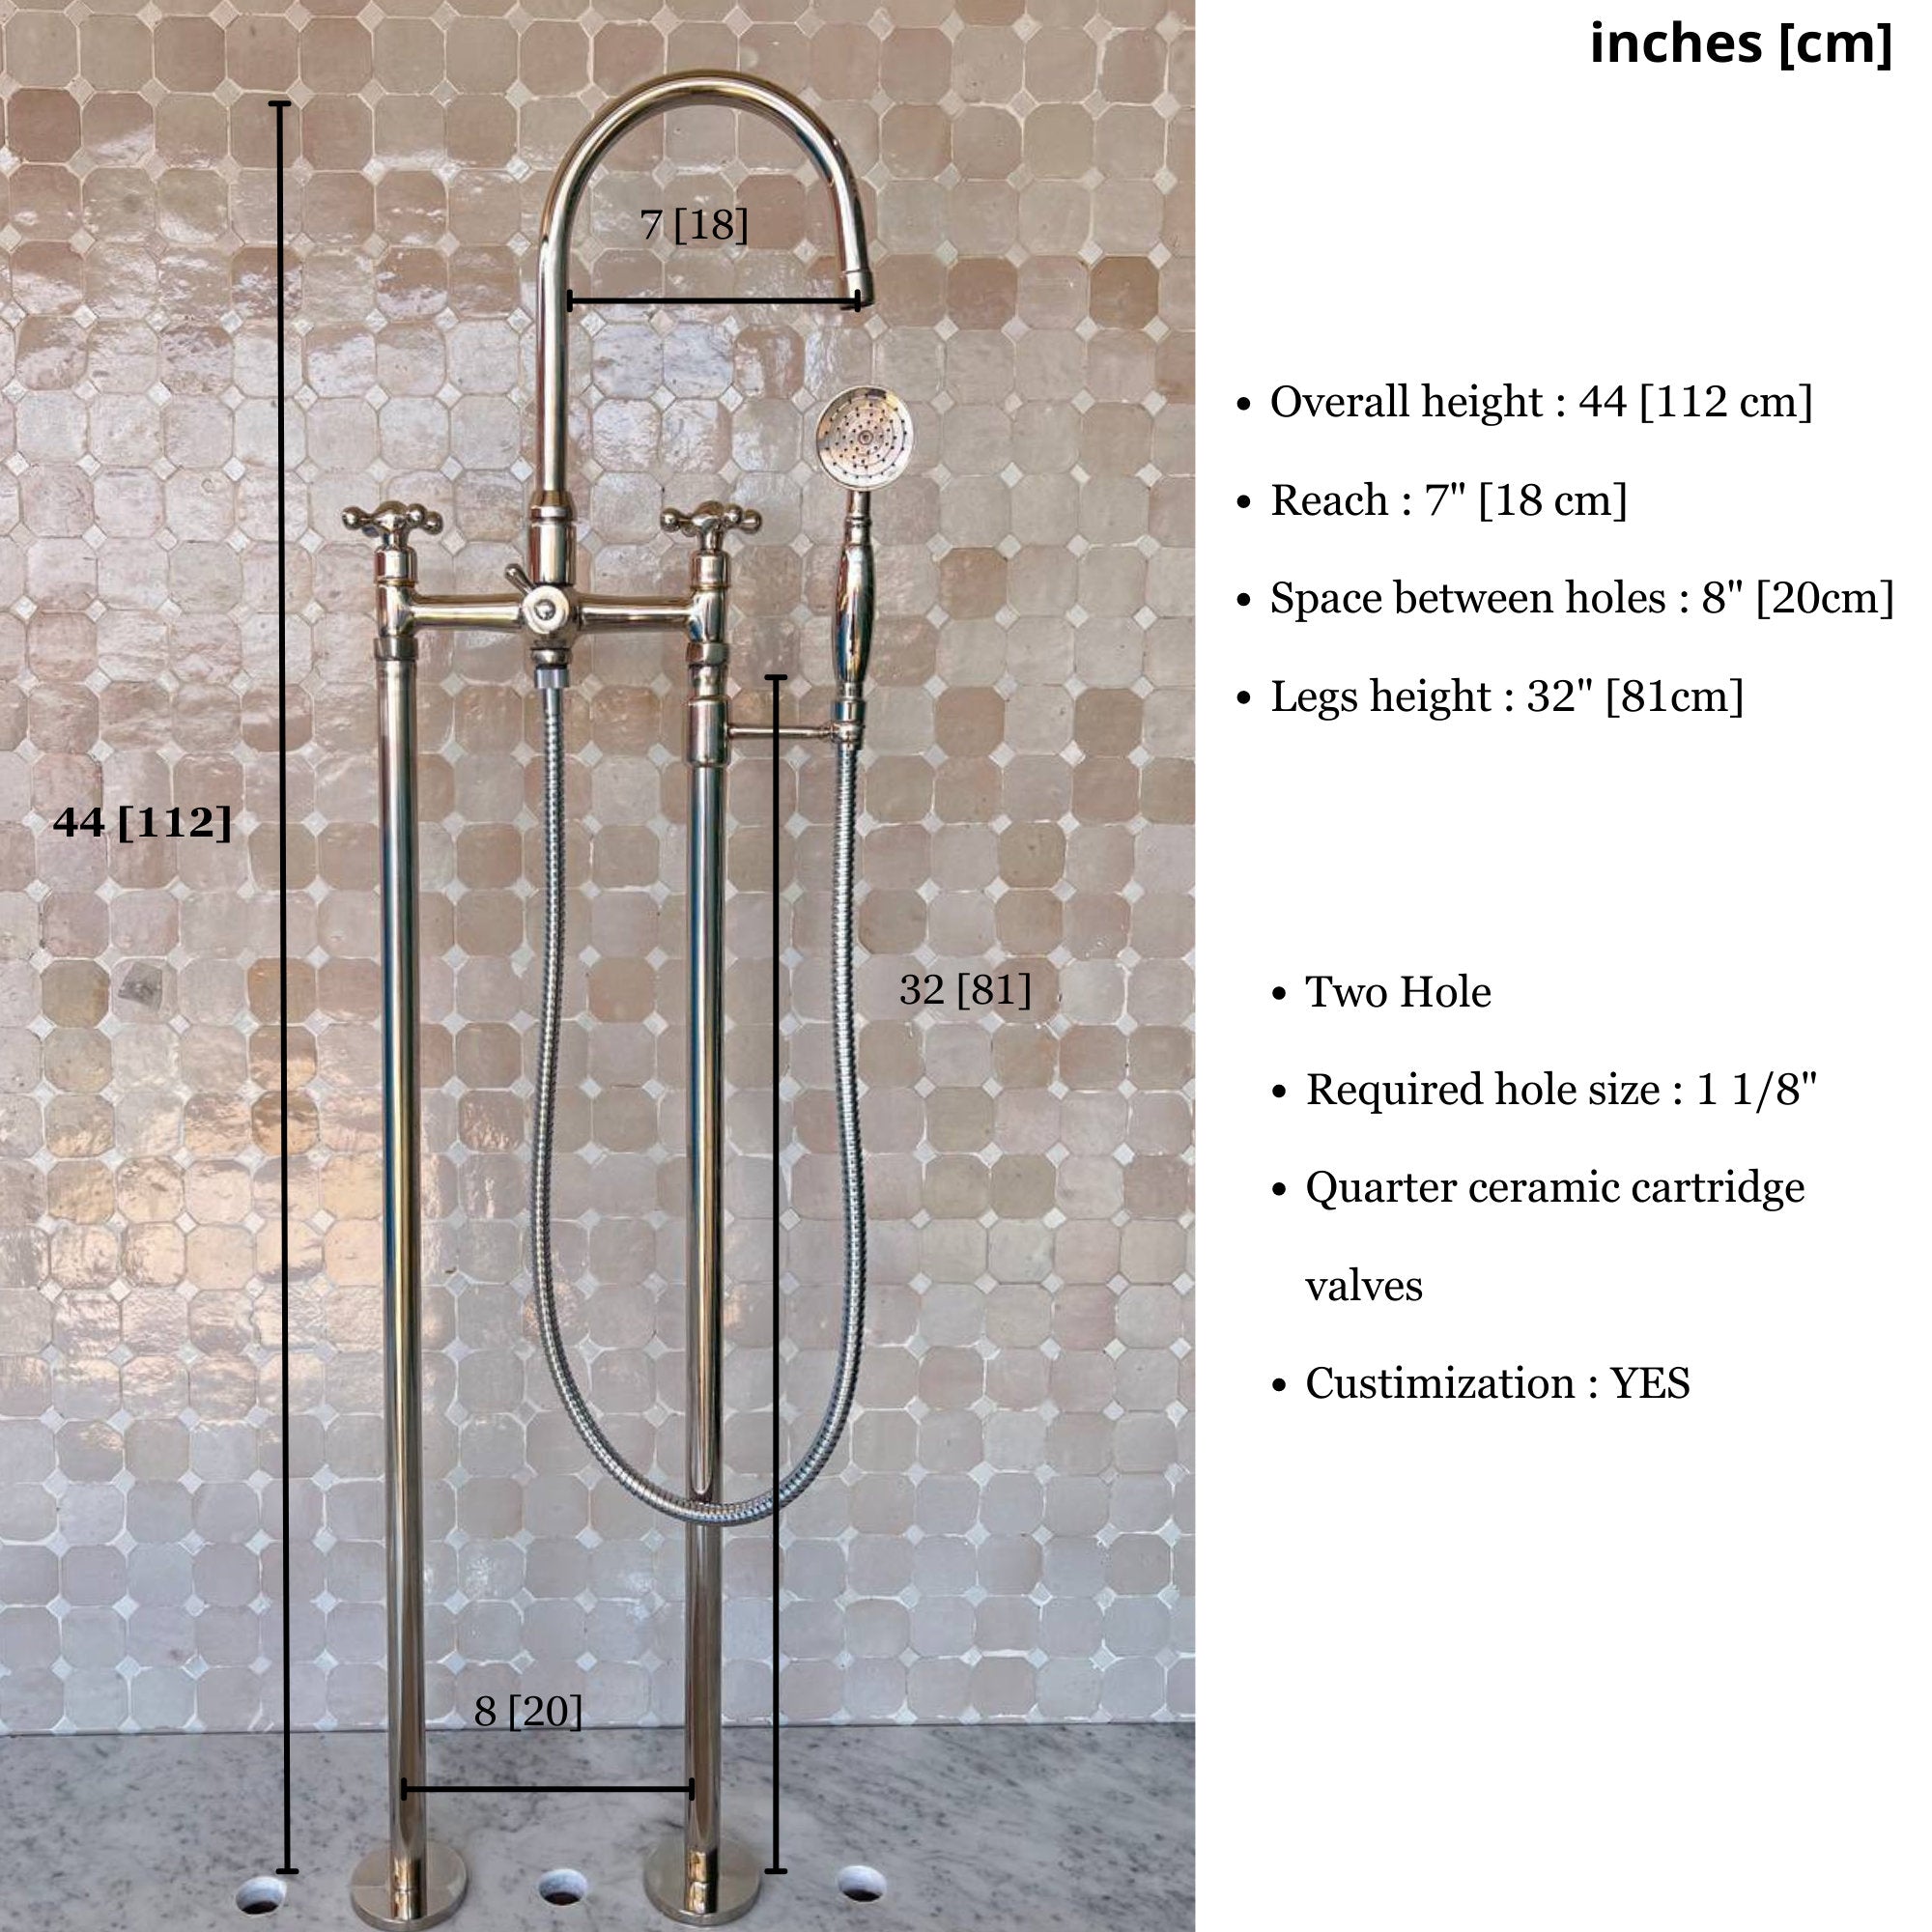 Nickel bathtub Faucet Floor Mount Bathtub Faucet, Tub Filler Faucet with Two Handles And Hand Shower - Free Standing Bathroom Vanity Faucet